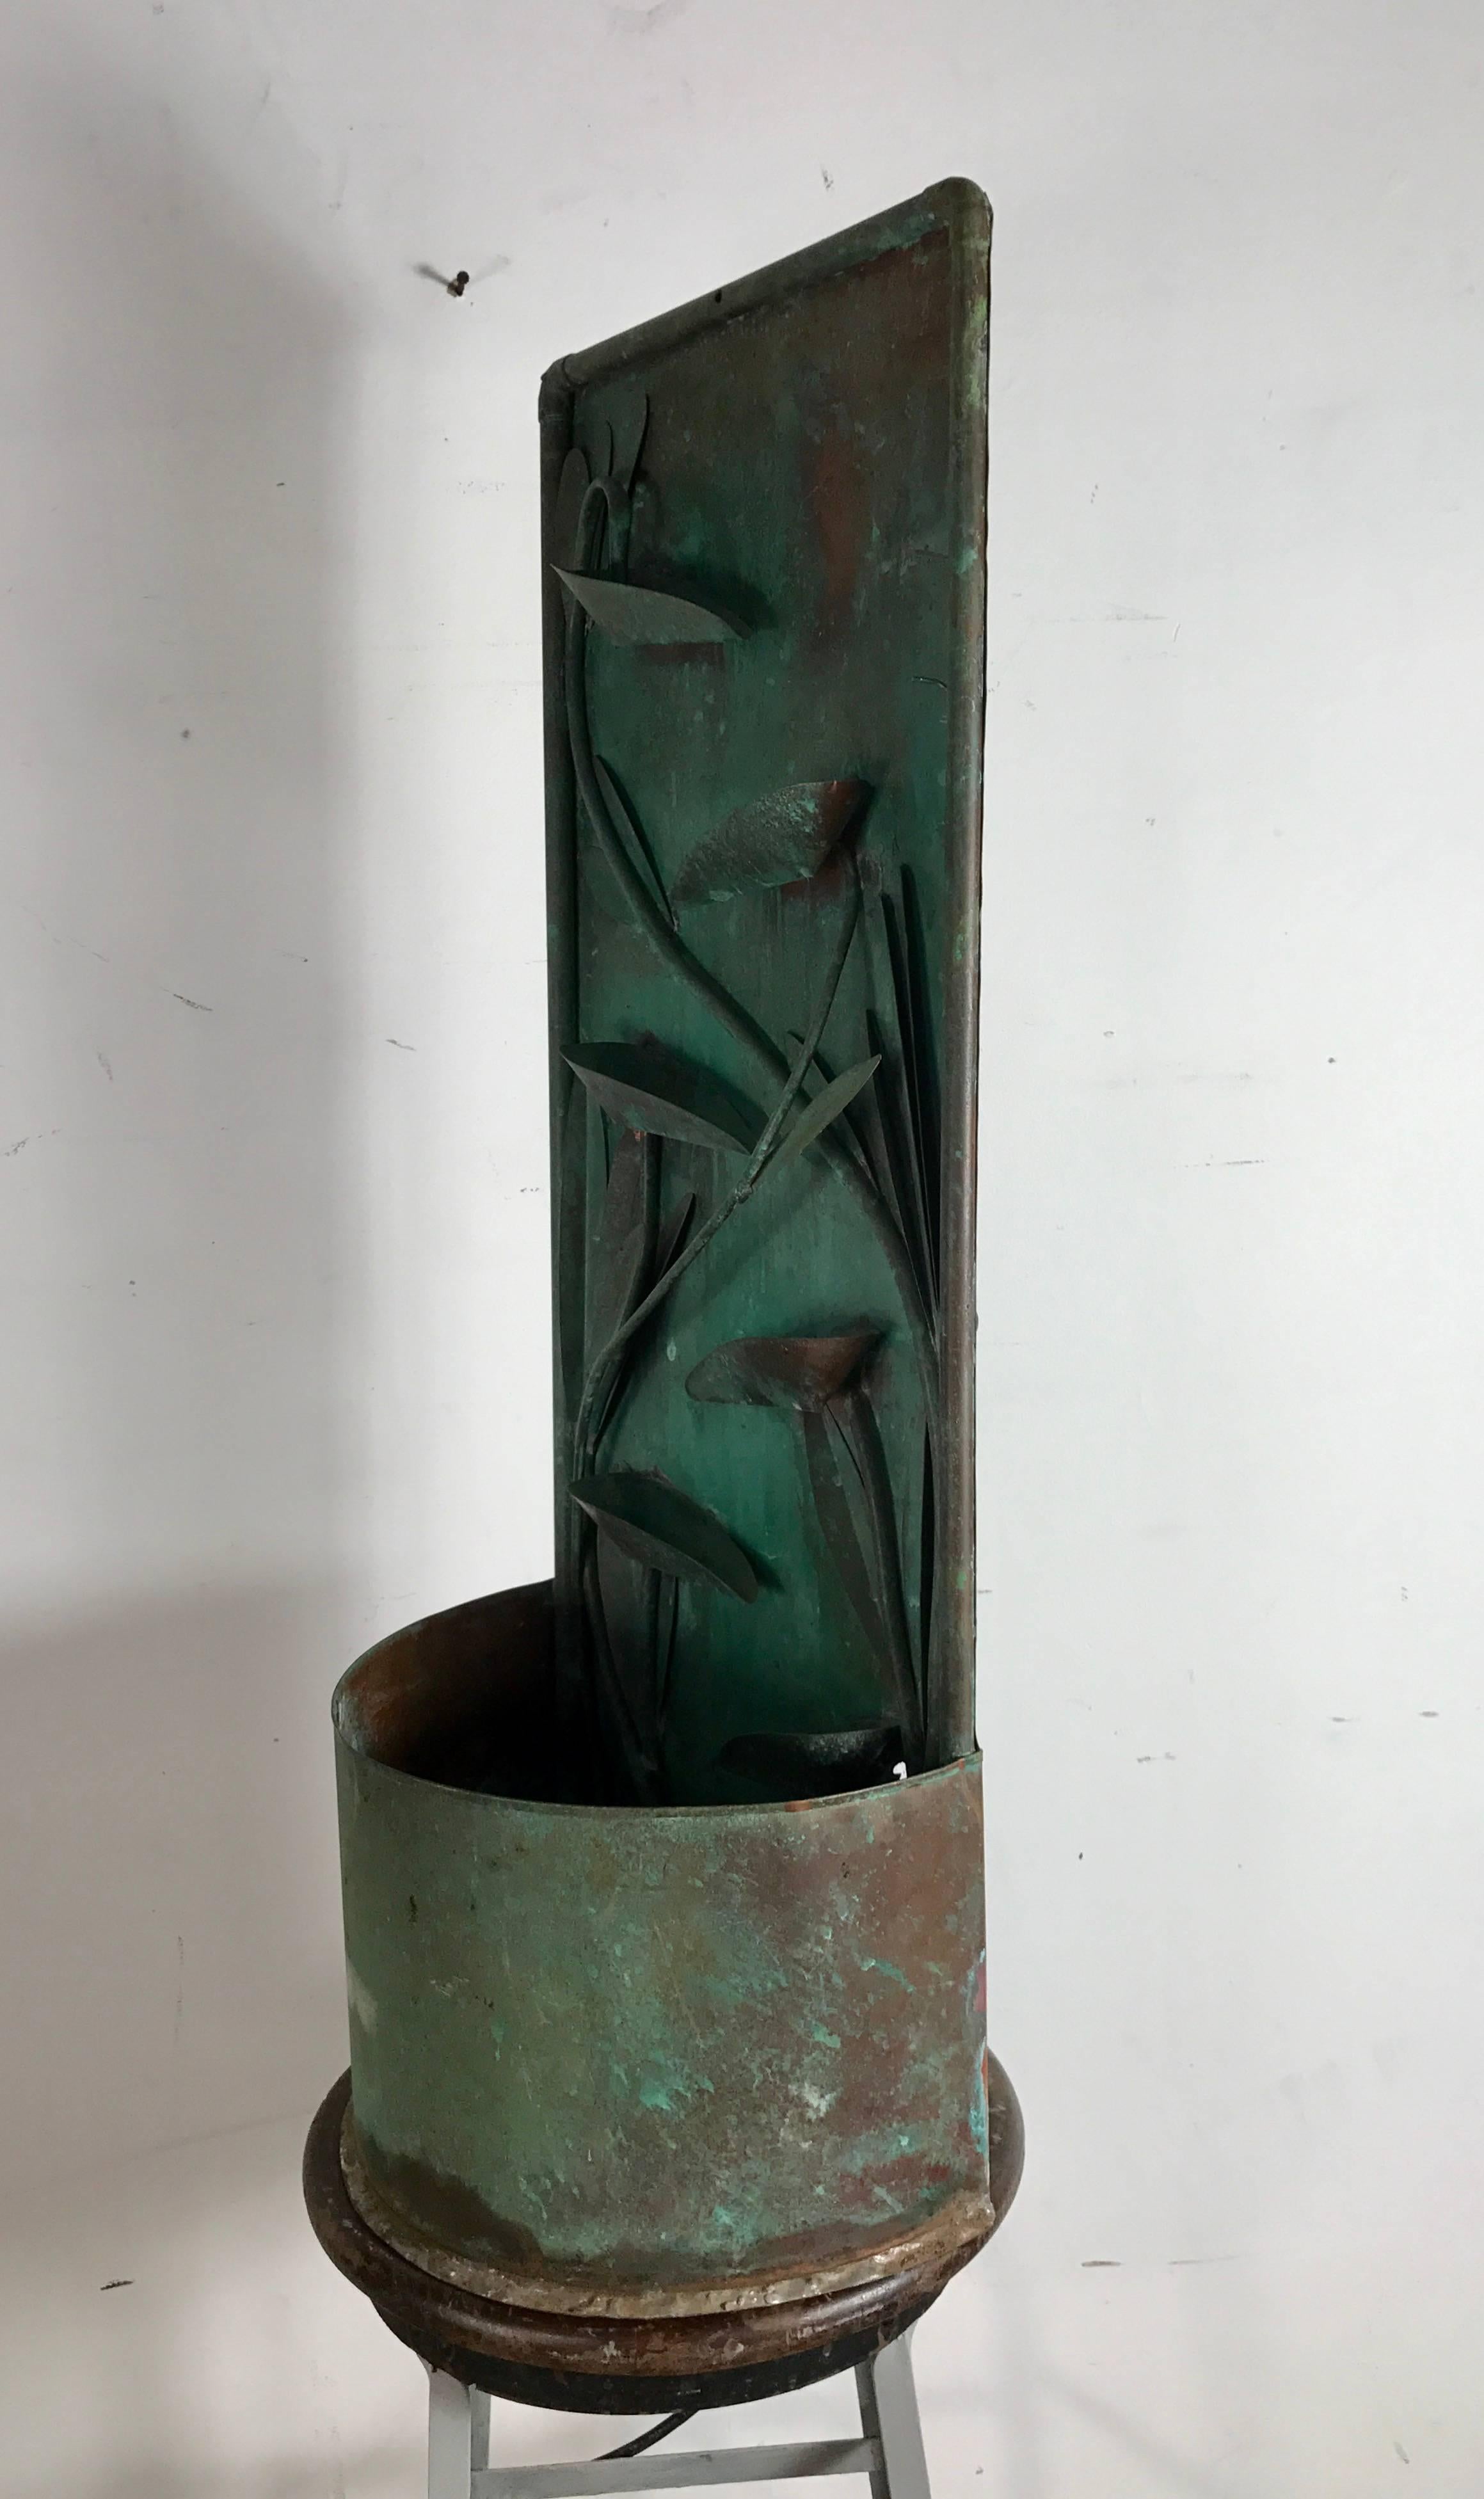 American Modernist Hanging Copper Water Fountain Sculpture, Amazing Form and Patina